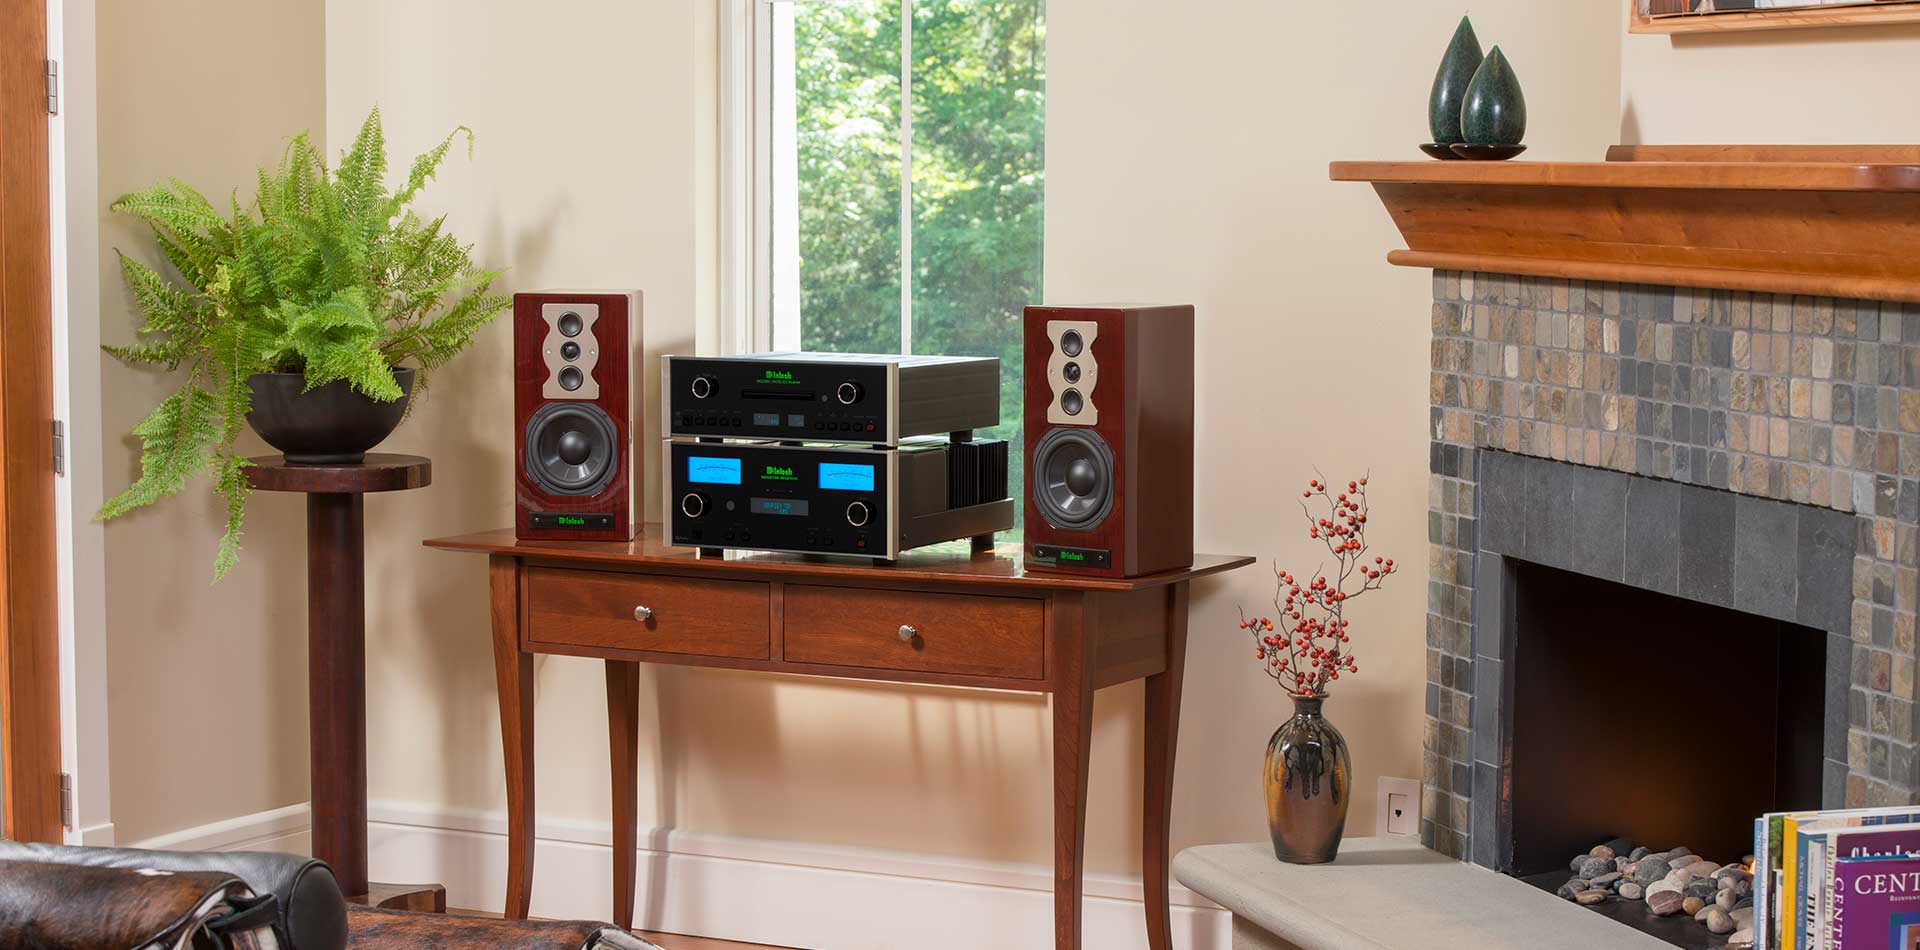 McIntosh Electronics Are Now Available For Audition In Our Showroom